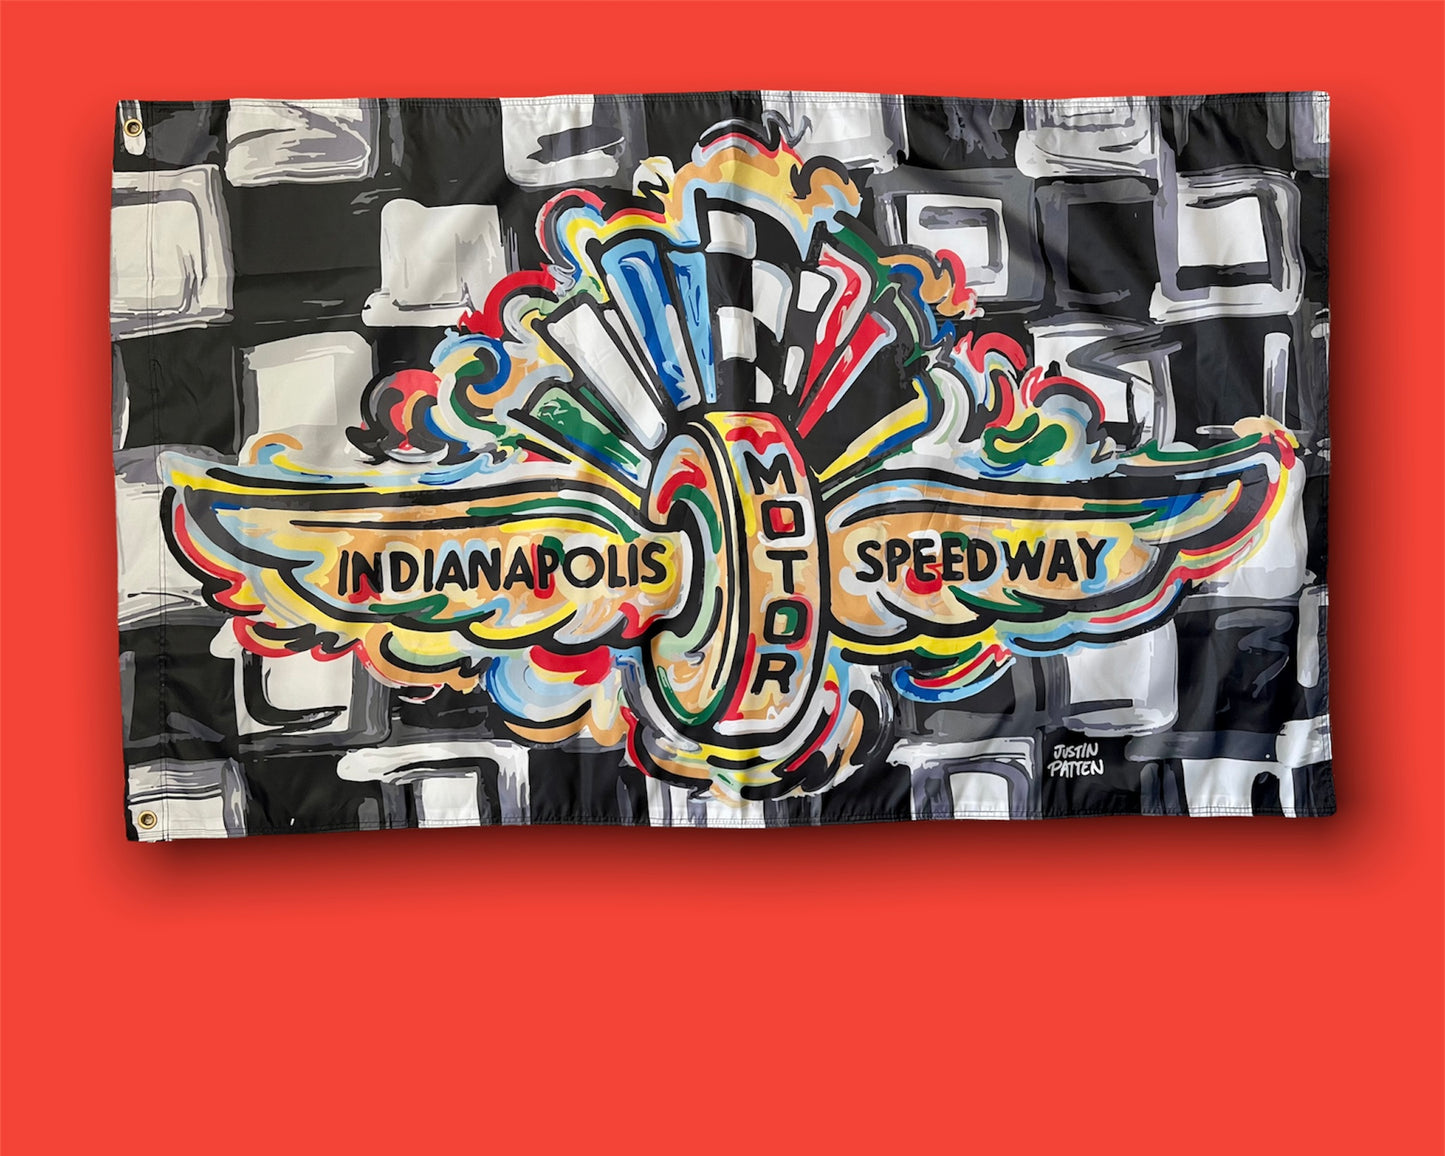 Indianapolis Motor Speedway Wing and Wheel Flag for Flag Pole (5’x3’ ft.) by Justin Patten